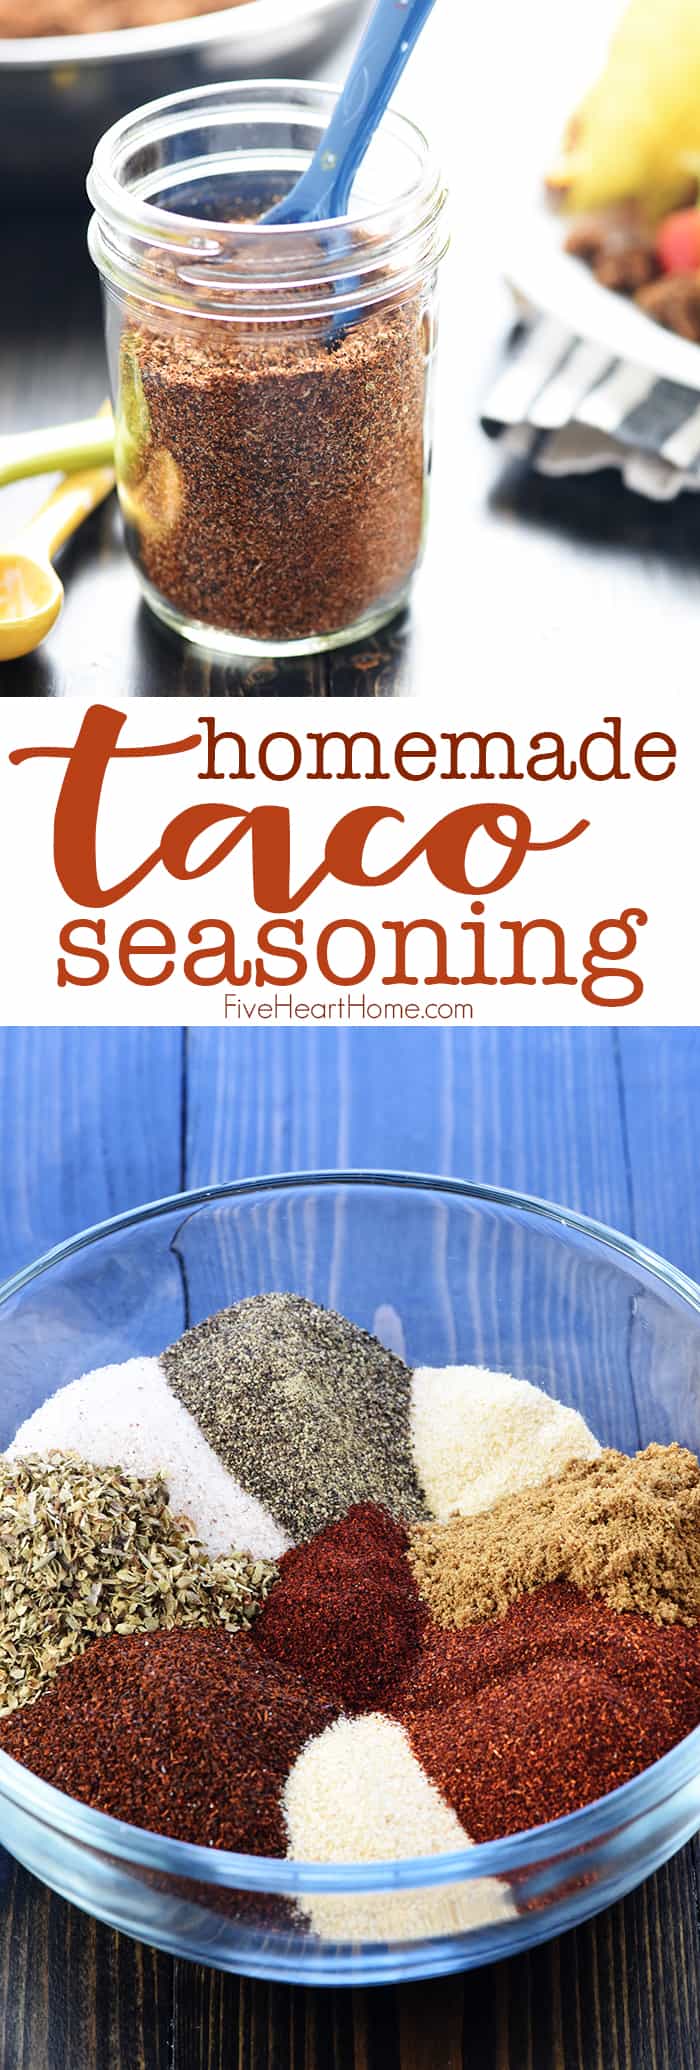 Homemade Taco Seasoning ~ you control the ingredients in this economical, easy-to-make homemade seasoning mix recipe...perfect for your favorite tacos or Mexican food recipes! | FiveHeartHome.com via @fivehearthome